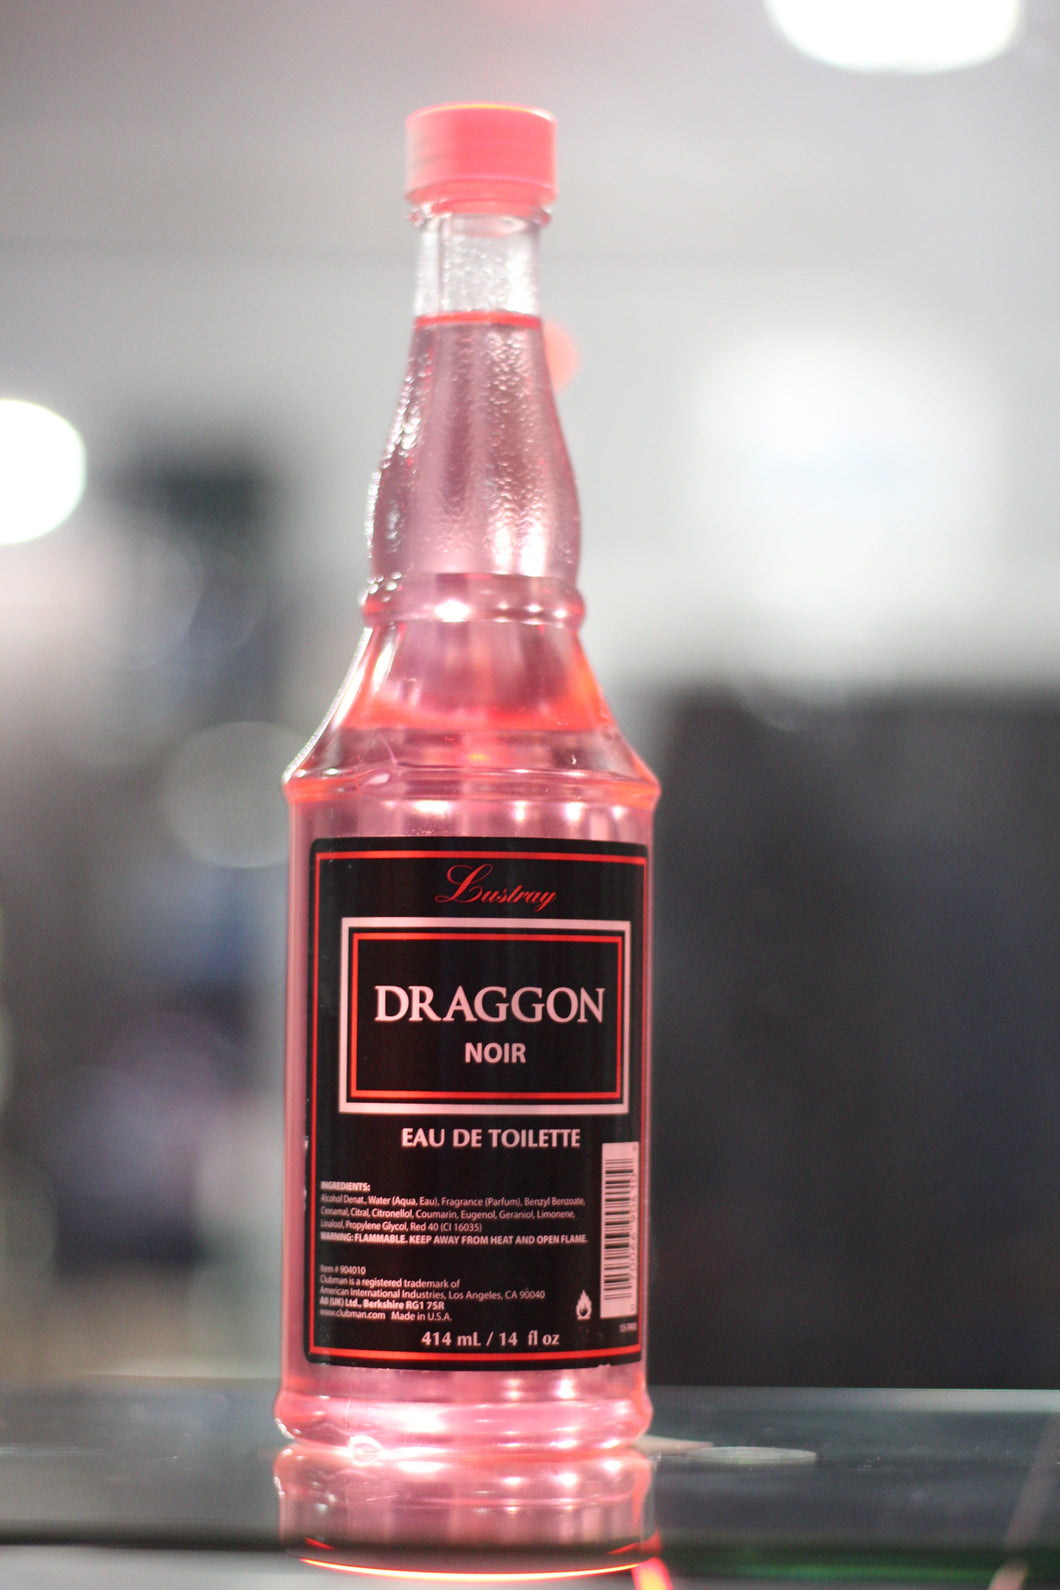 Dragon aftershave